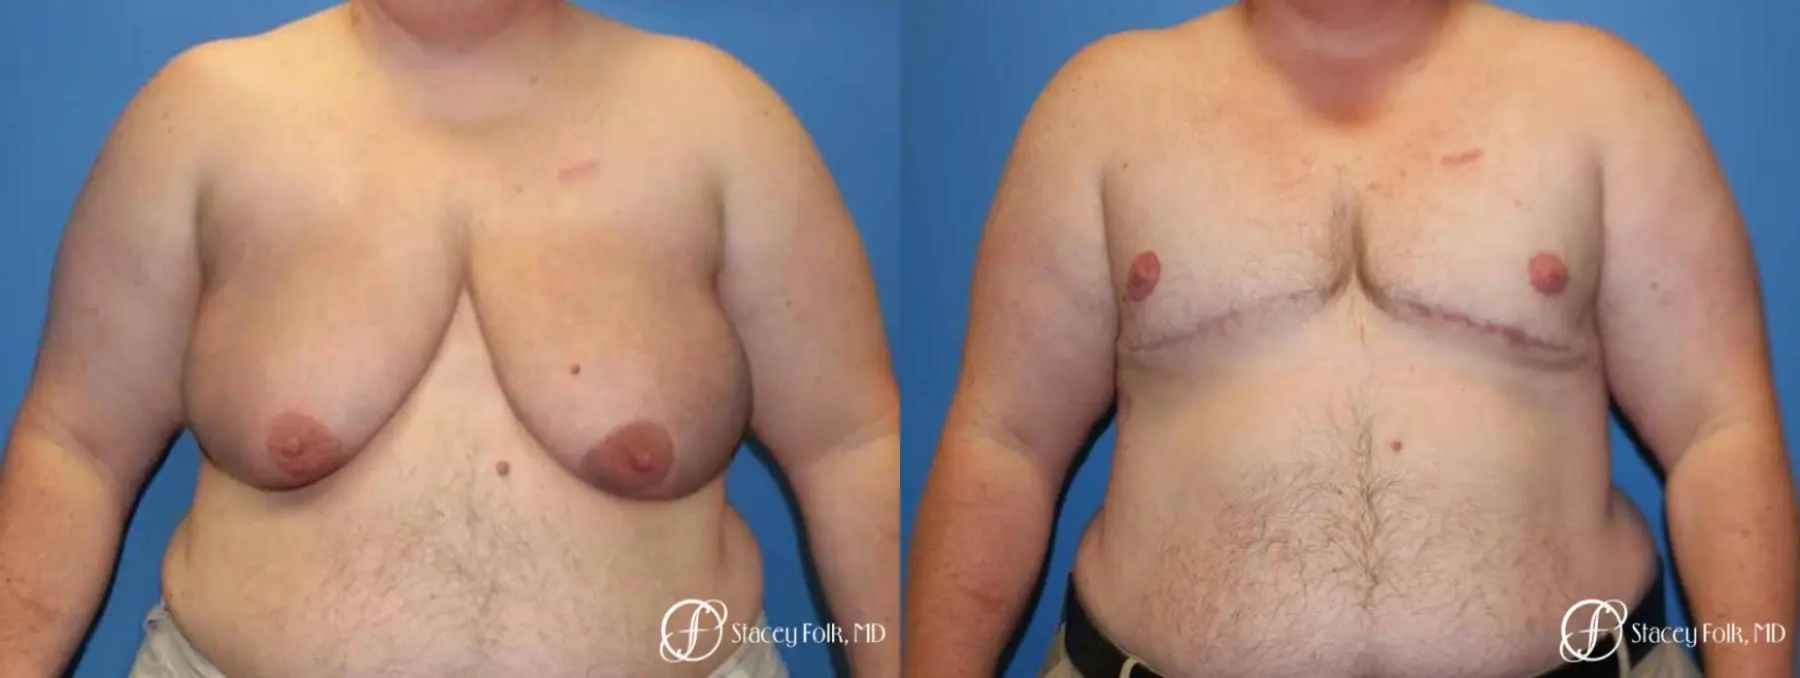 Denver Female to male top surgery 5258 - Before and After 1